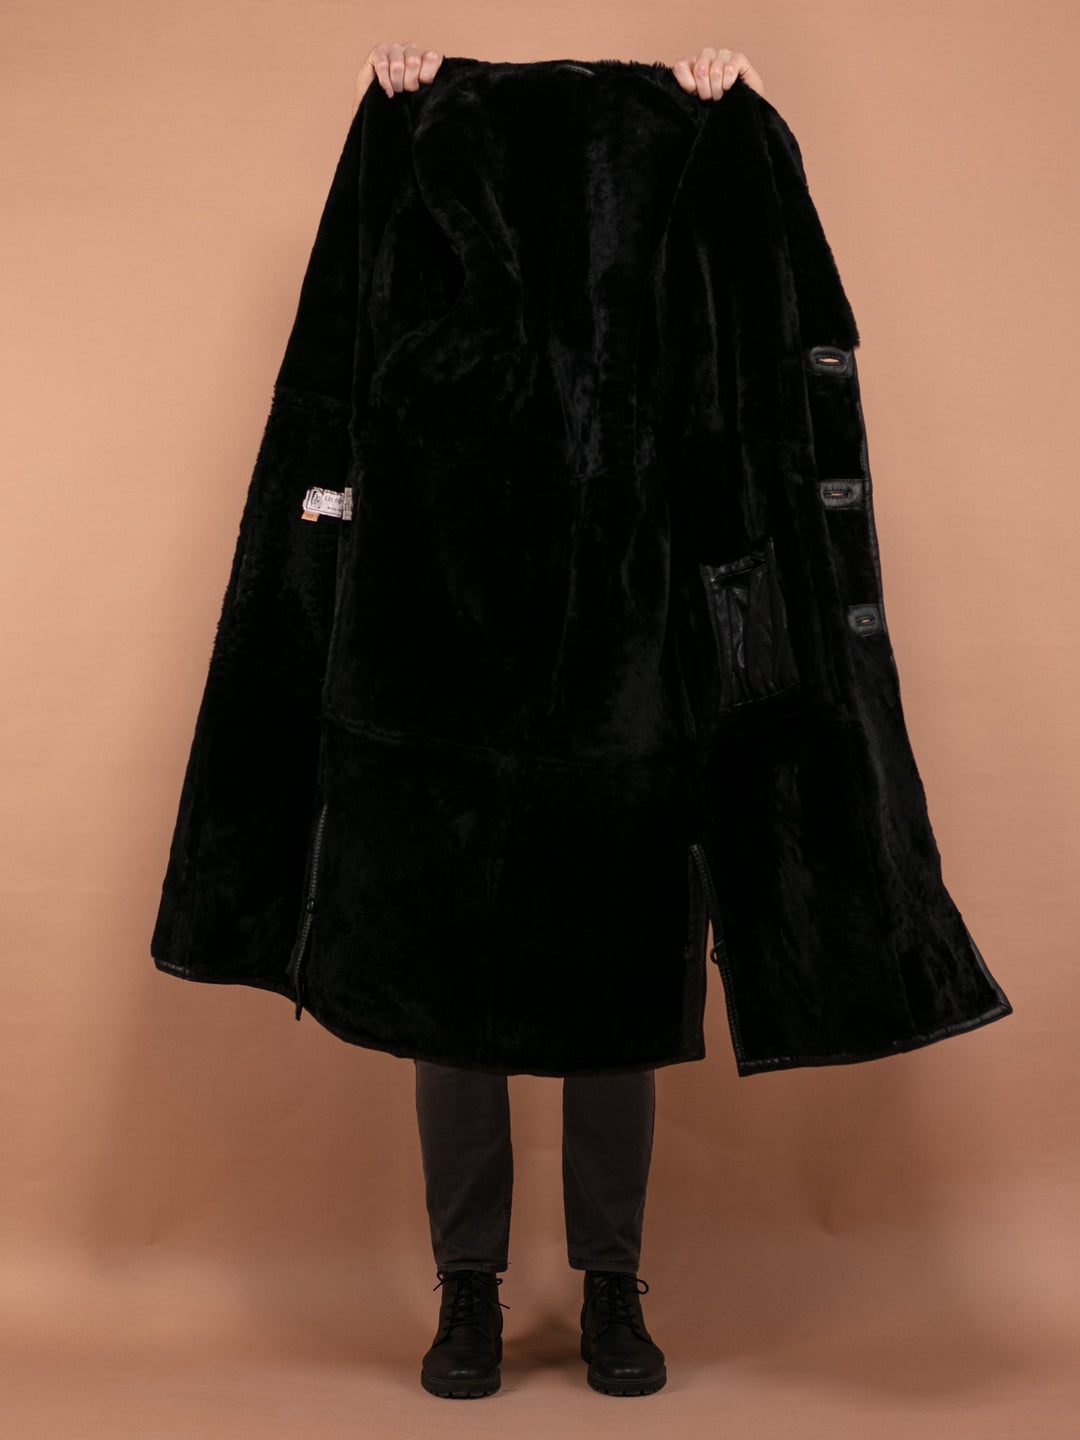 Long Shearling Coat 70's, Size L Large, Made in Italy Black Vintage Sheepskin Coat, Warm Winter Clothing, Midi Leather Coat, 70s Men Clothes